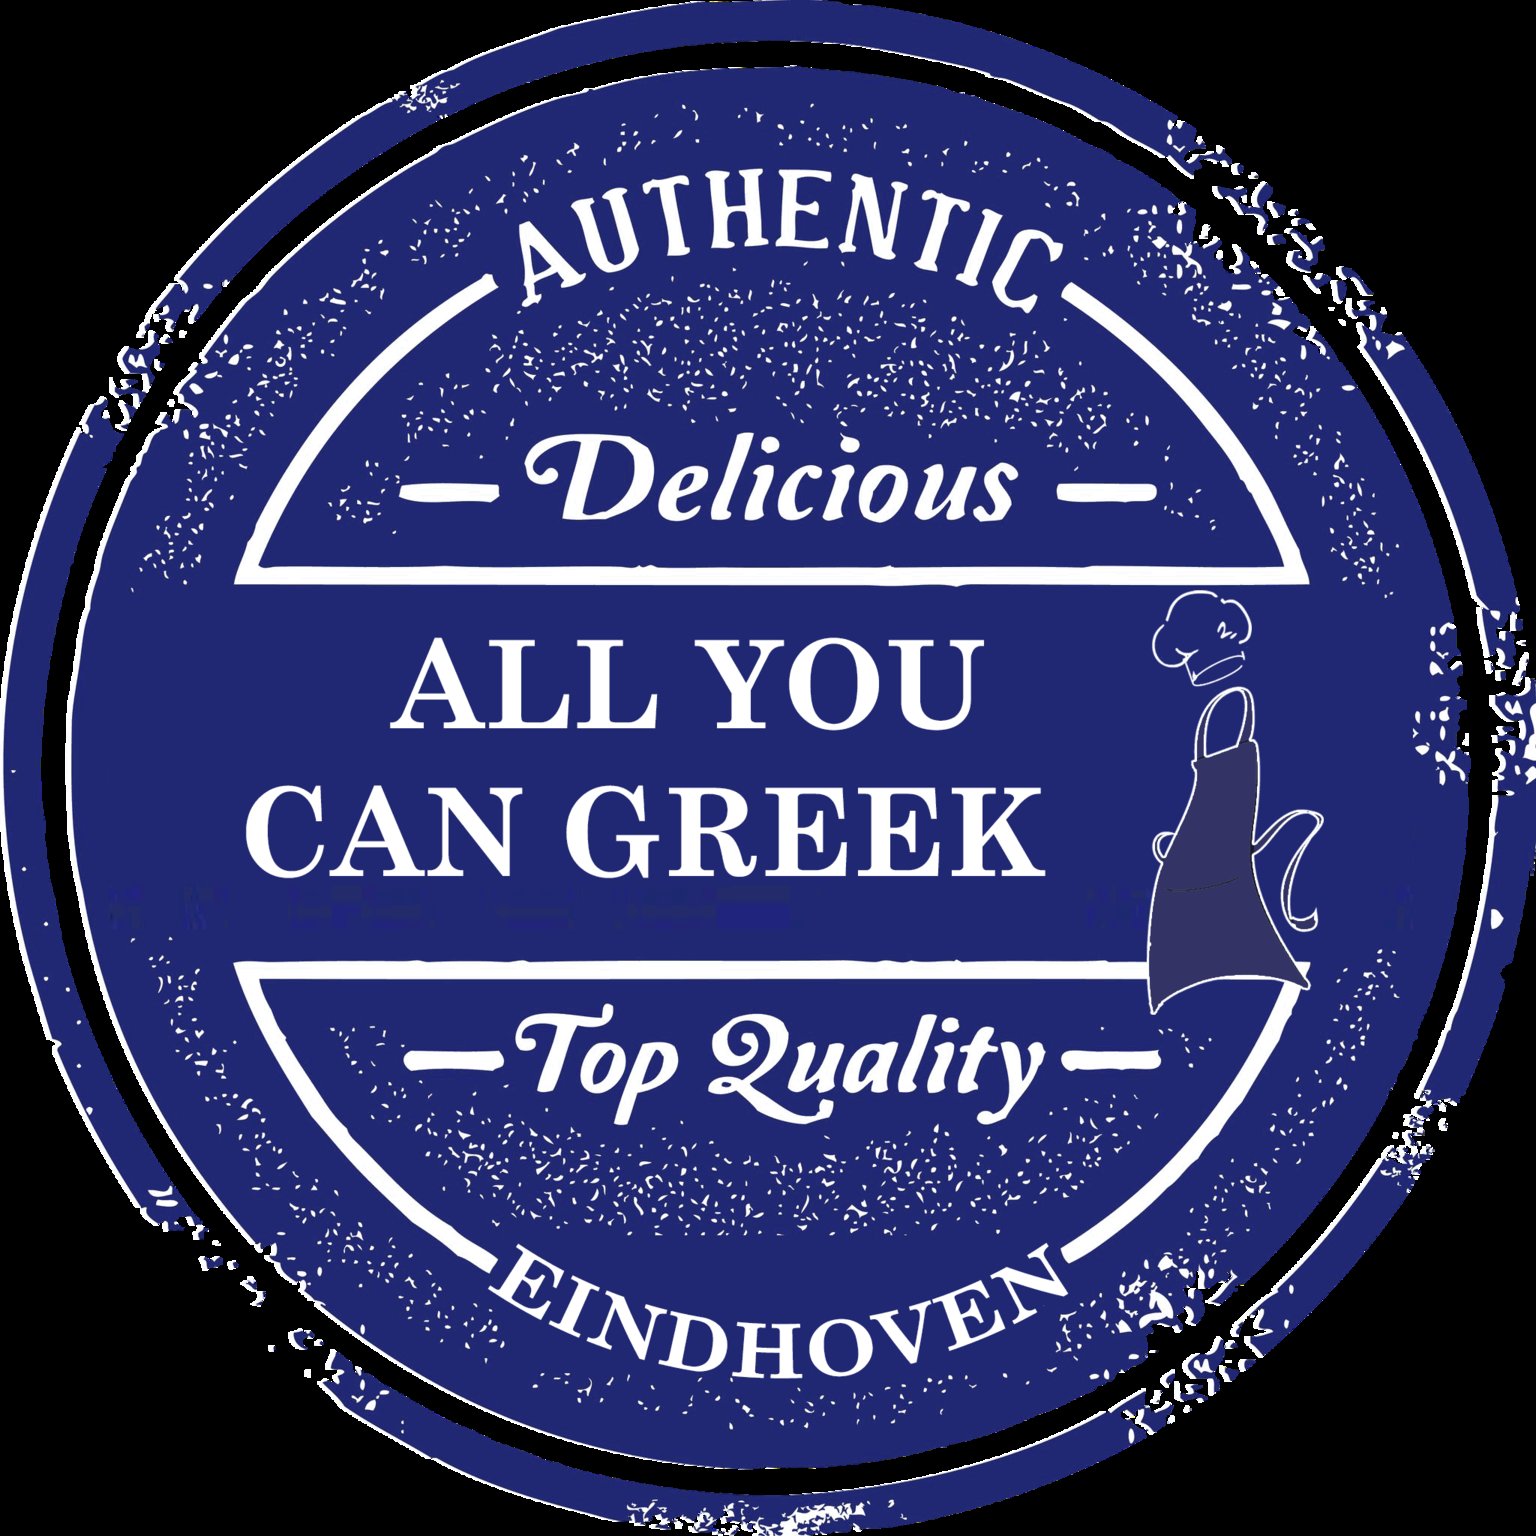 All You Can Greek